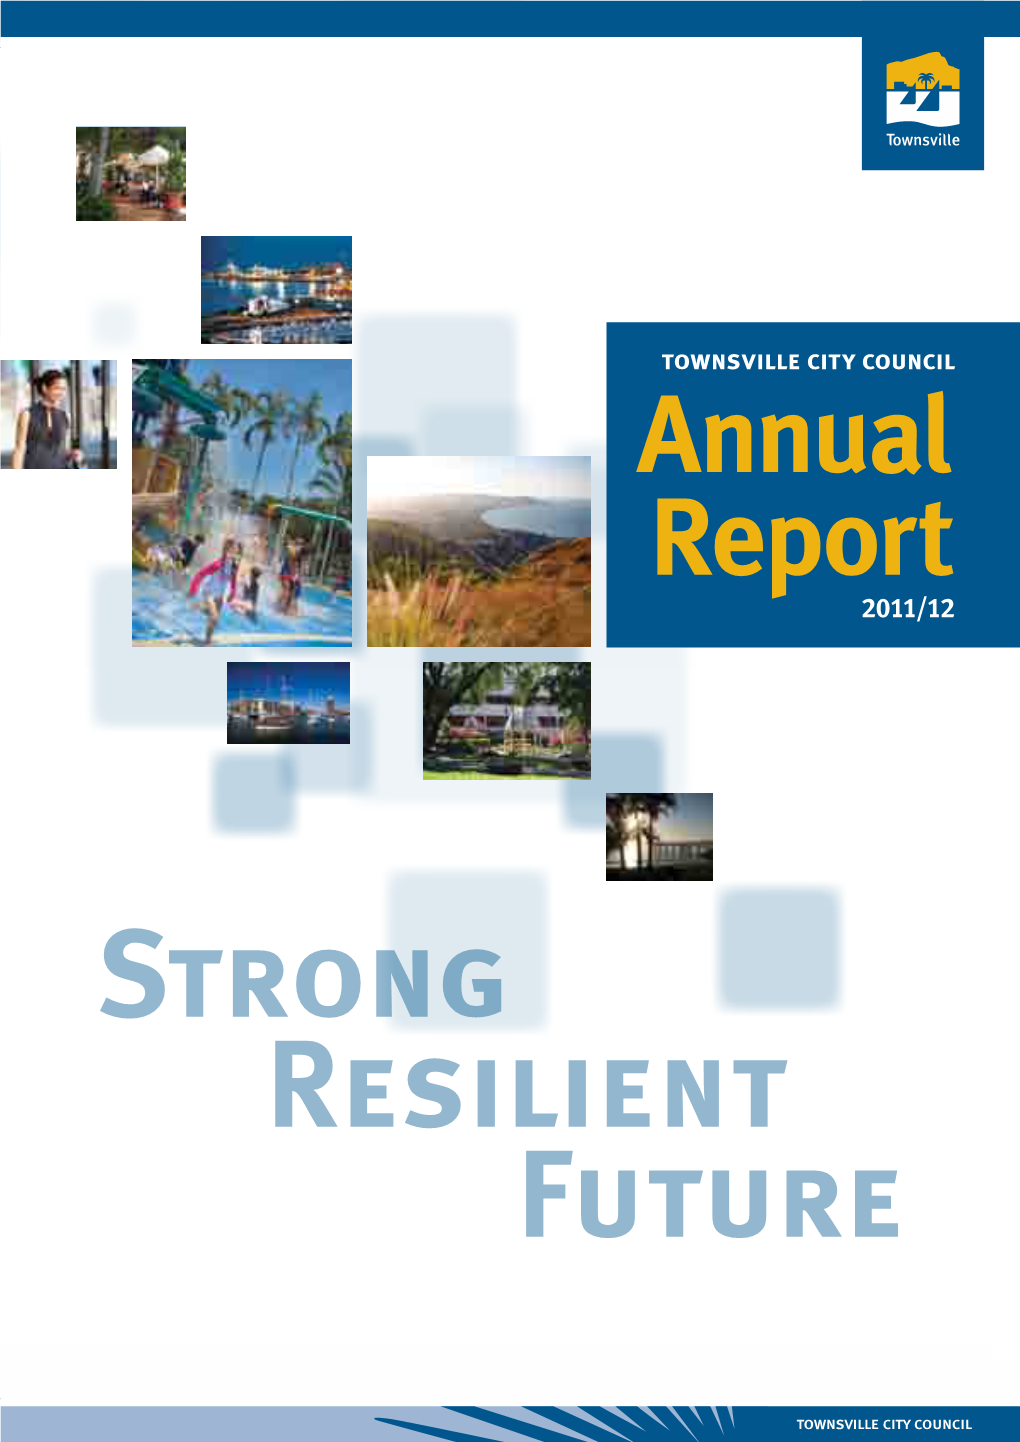 Townsville City Council Annual Report 2011/12